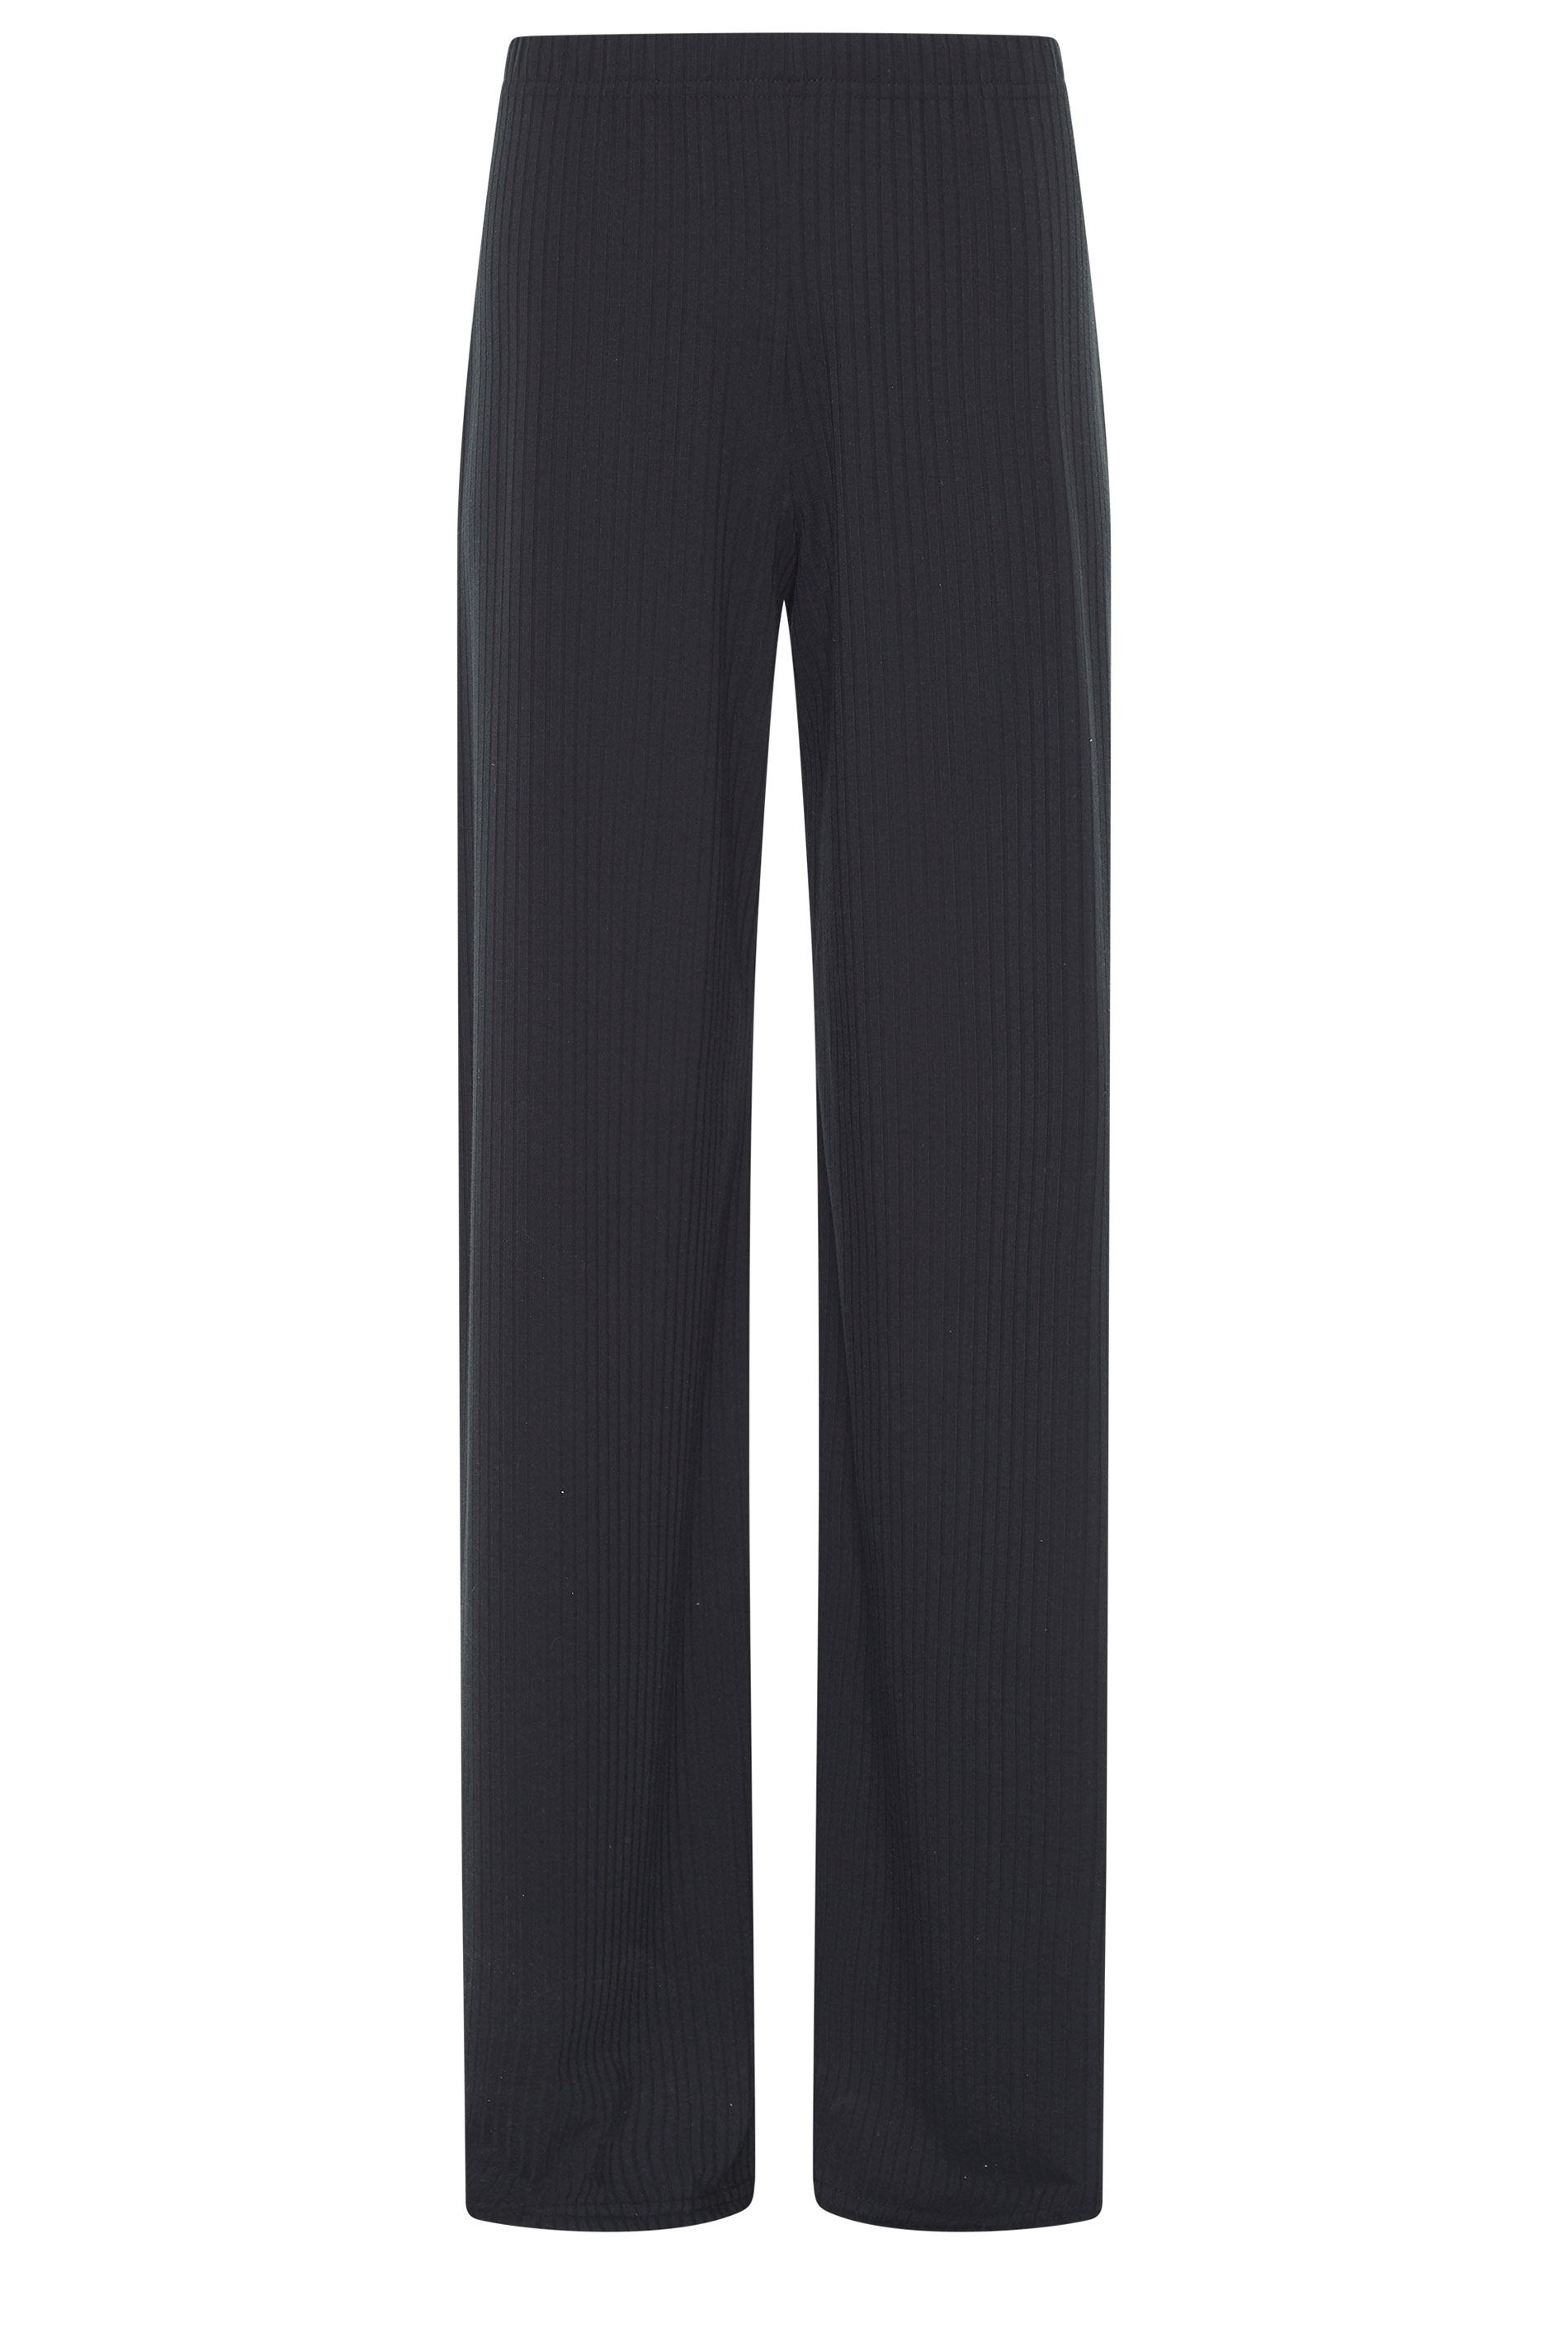 LTS Black Ribbed Wide Leg Trousers | Long Tall Sally